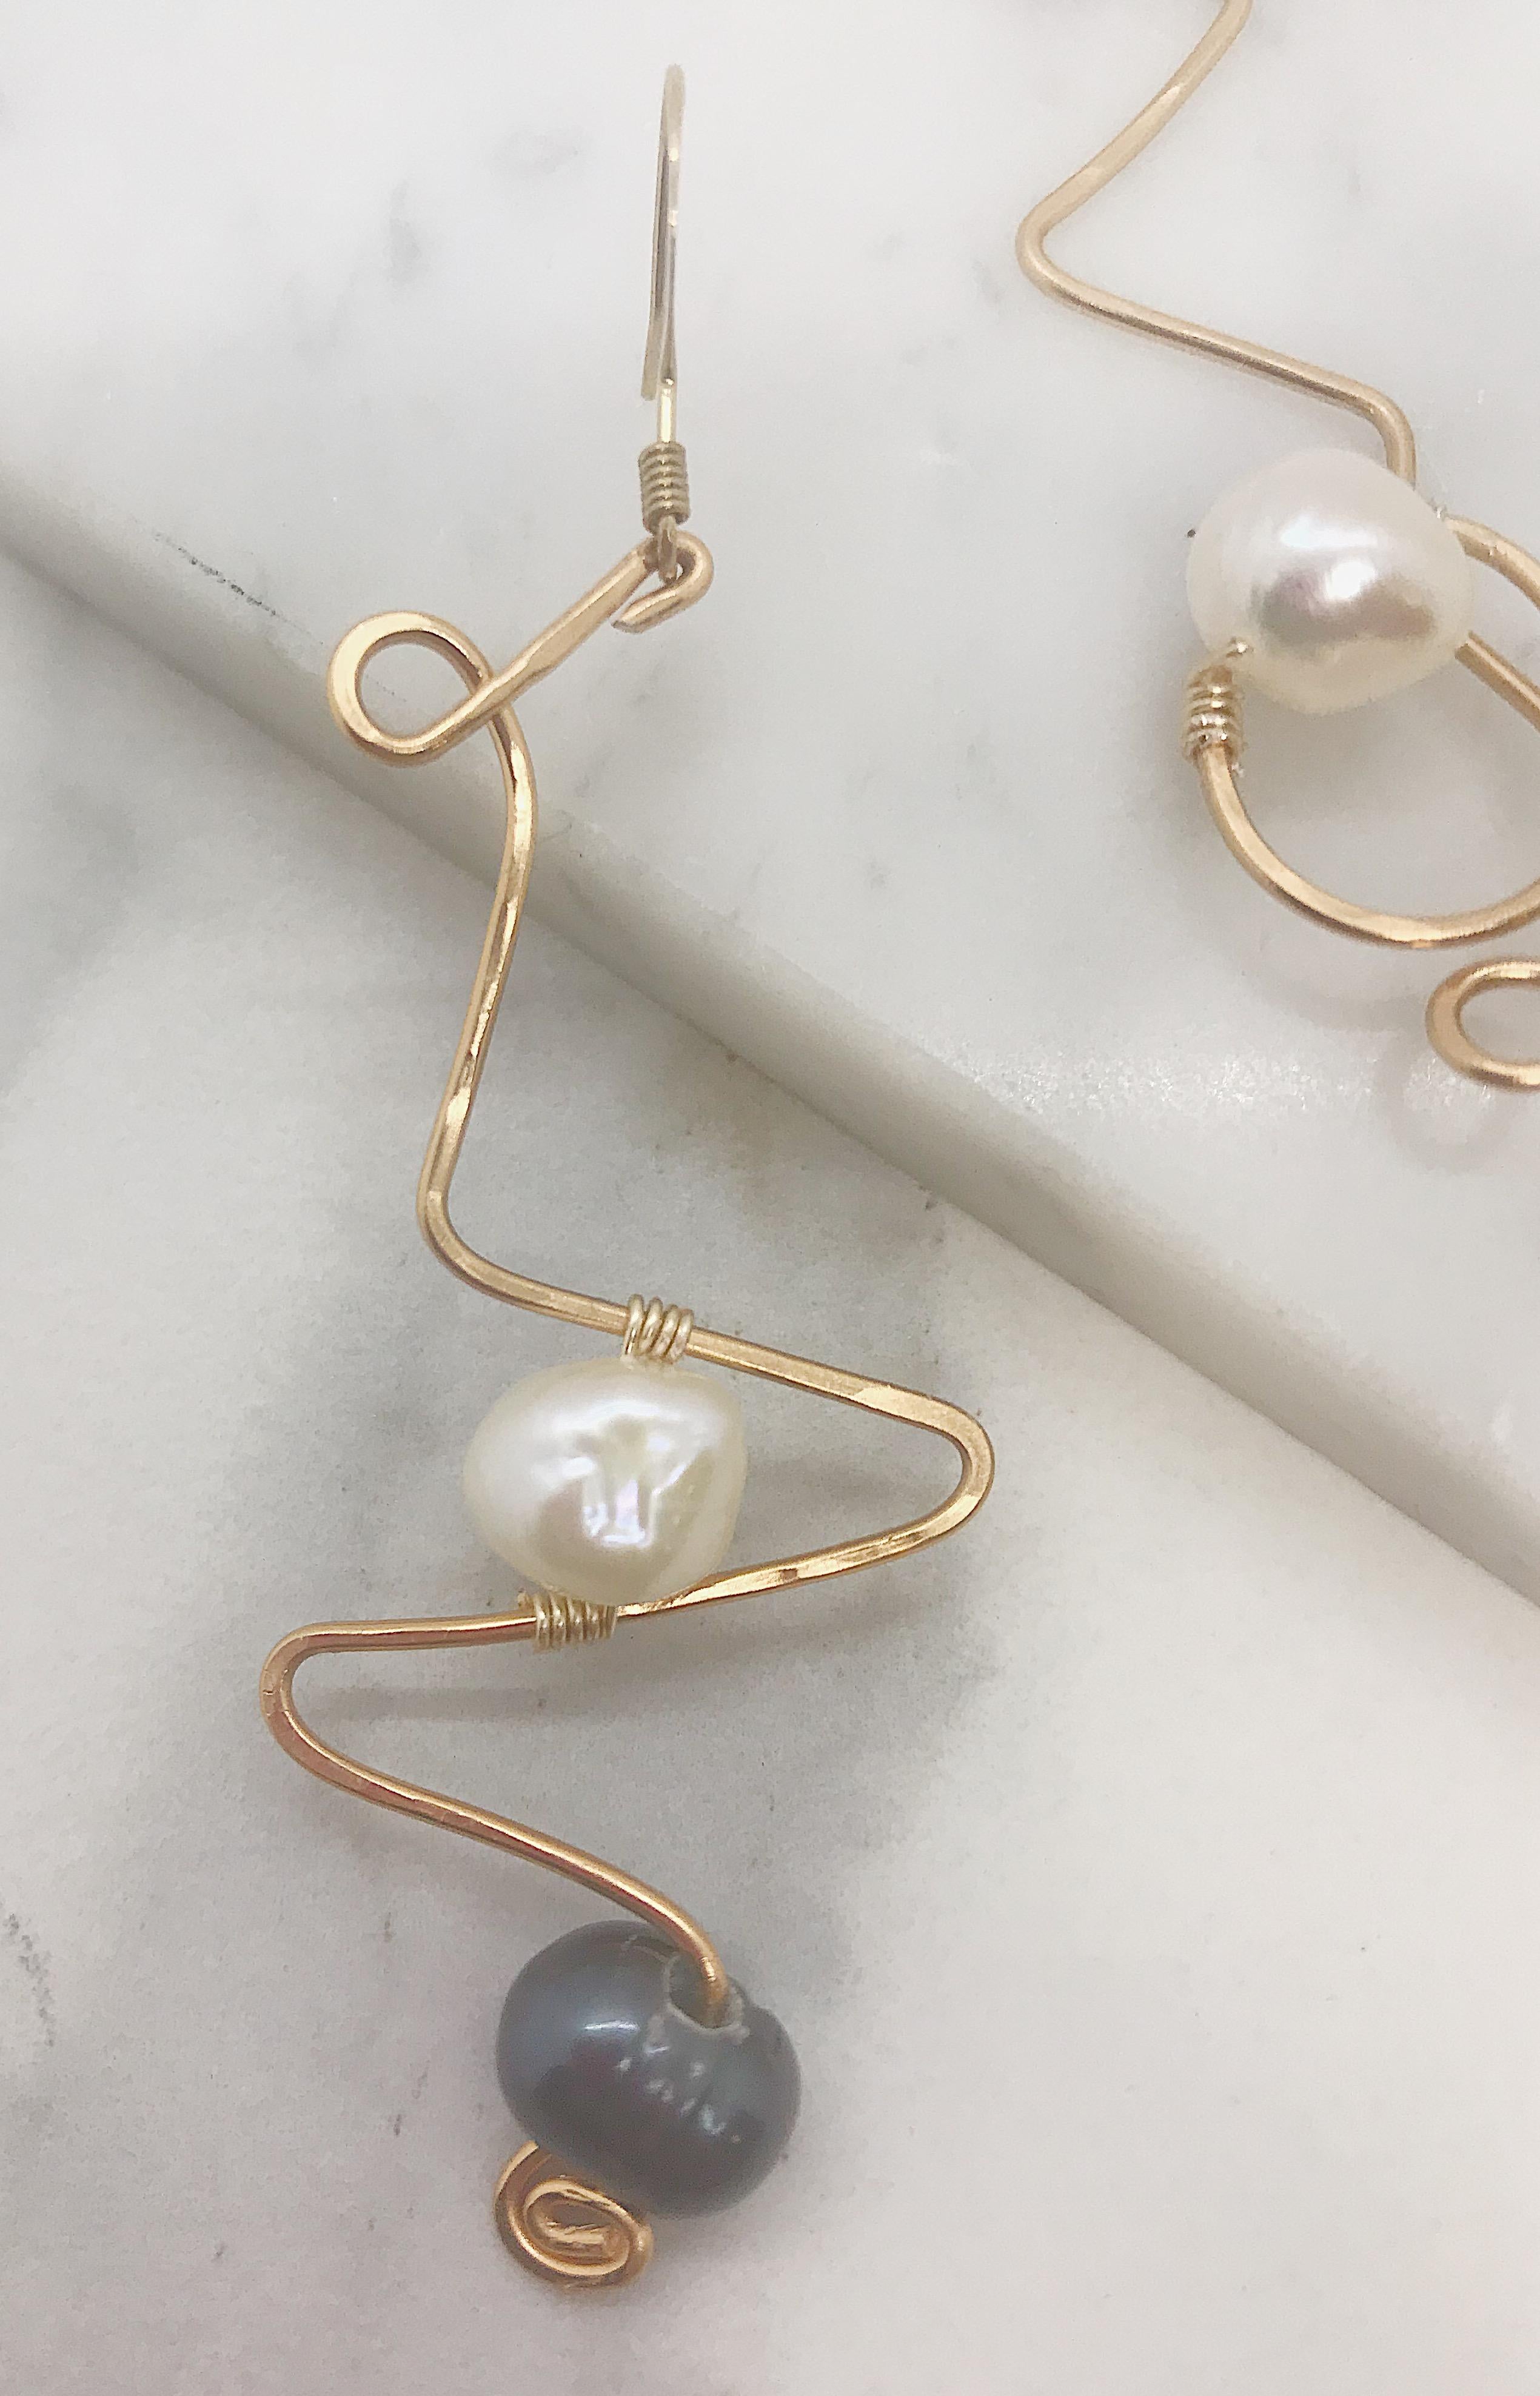 Contemporary Sidney Cherie Studio Texture Gold brass Earrings with Freshwater Pearls For Sale